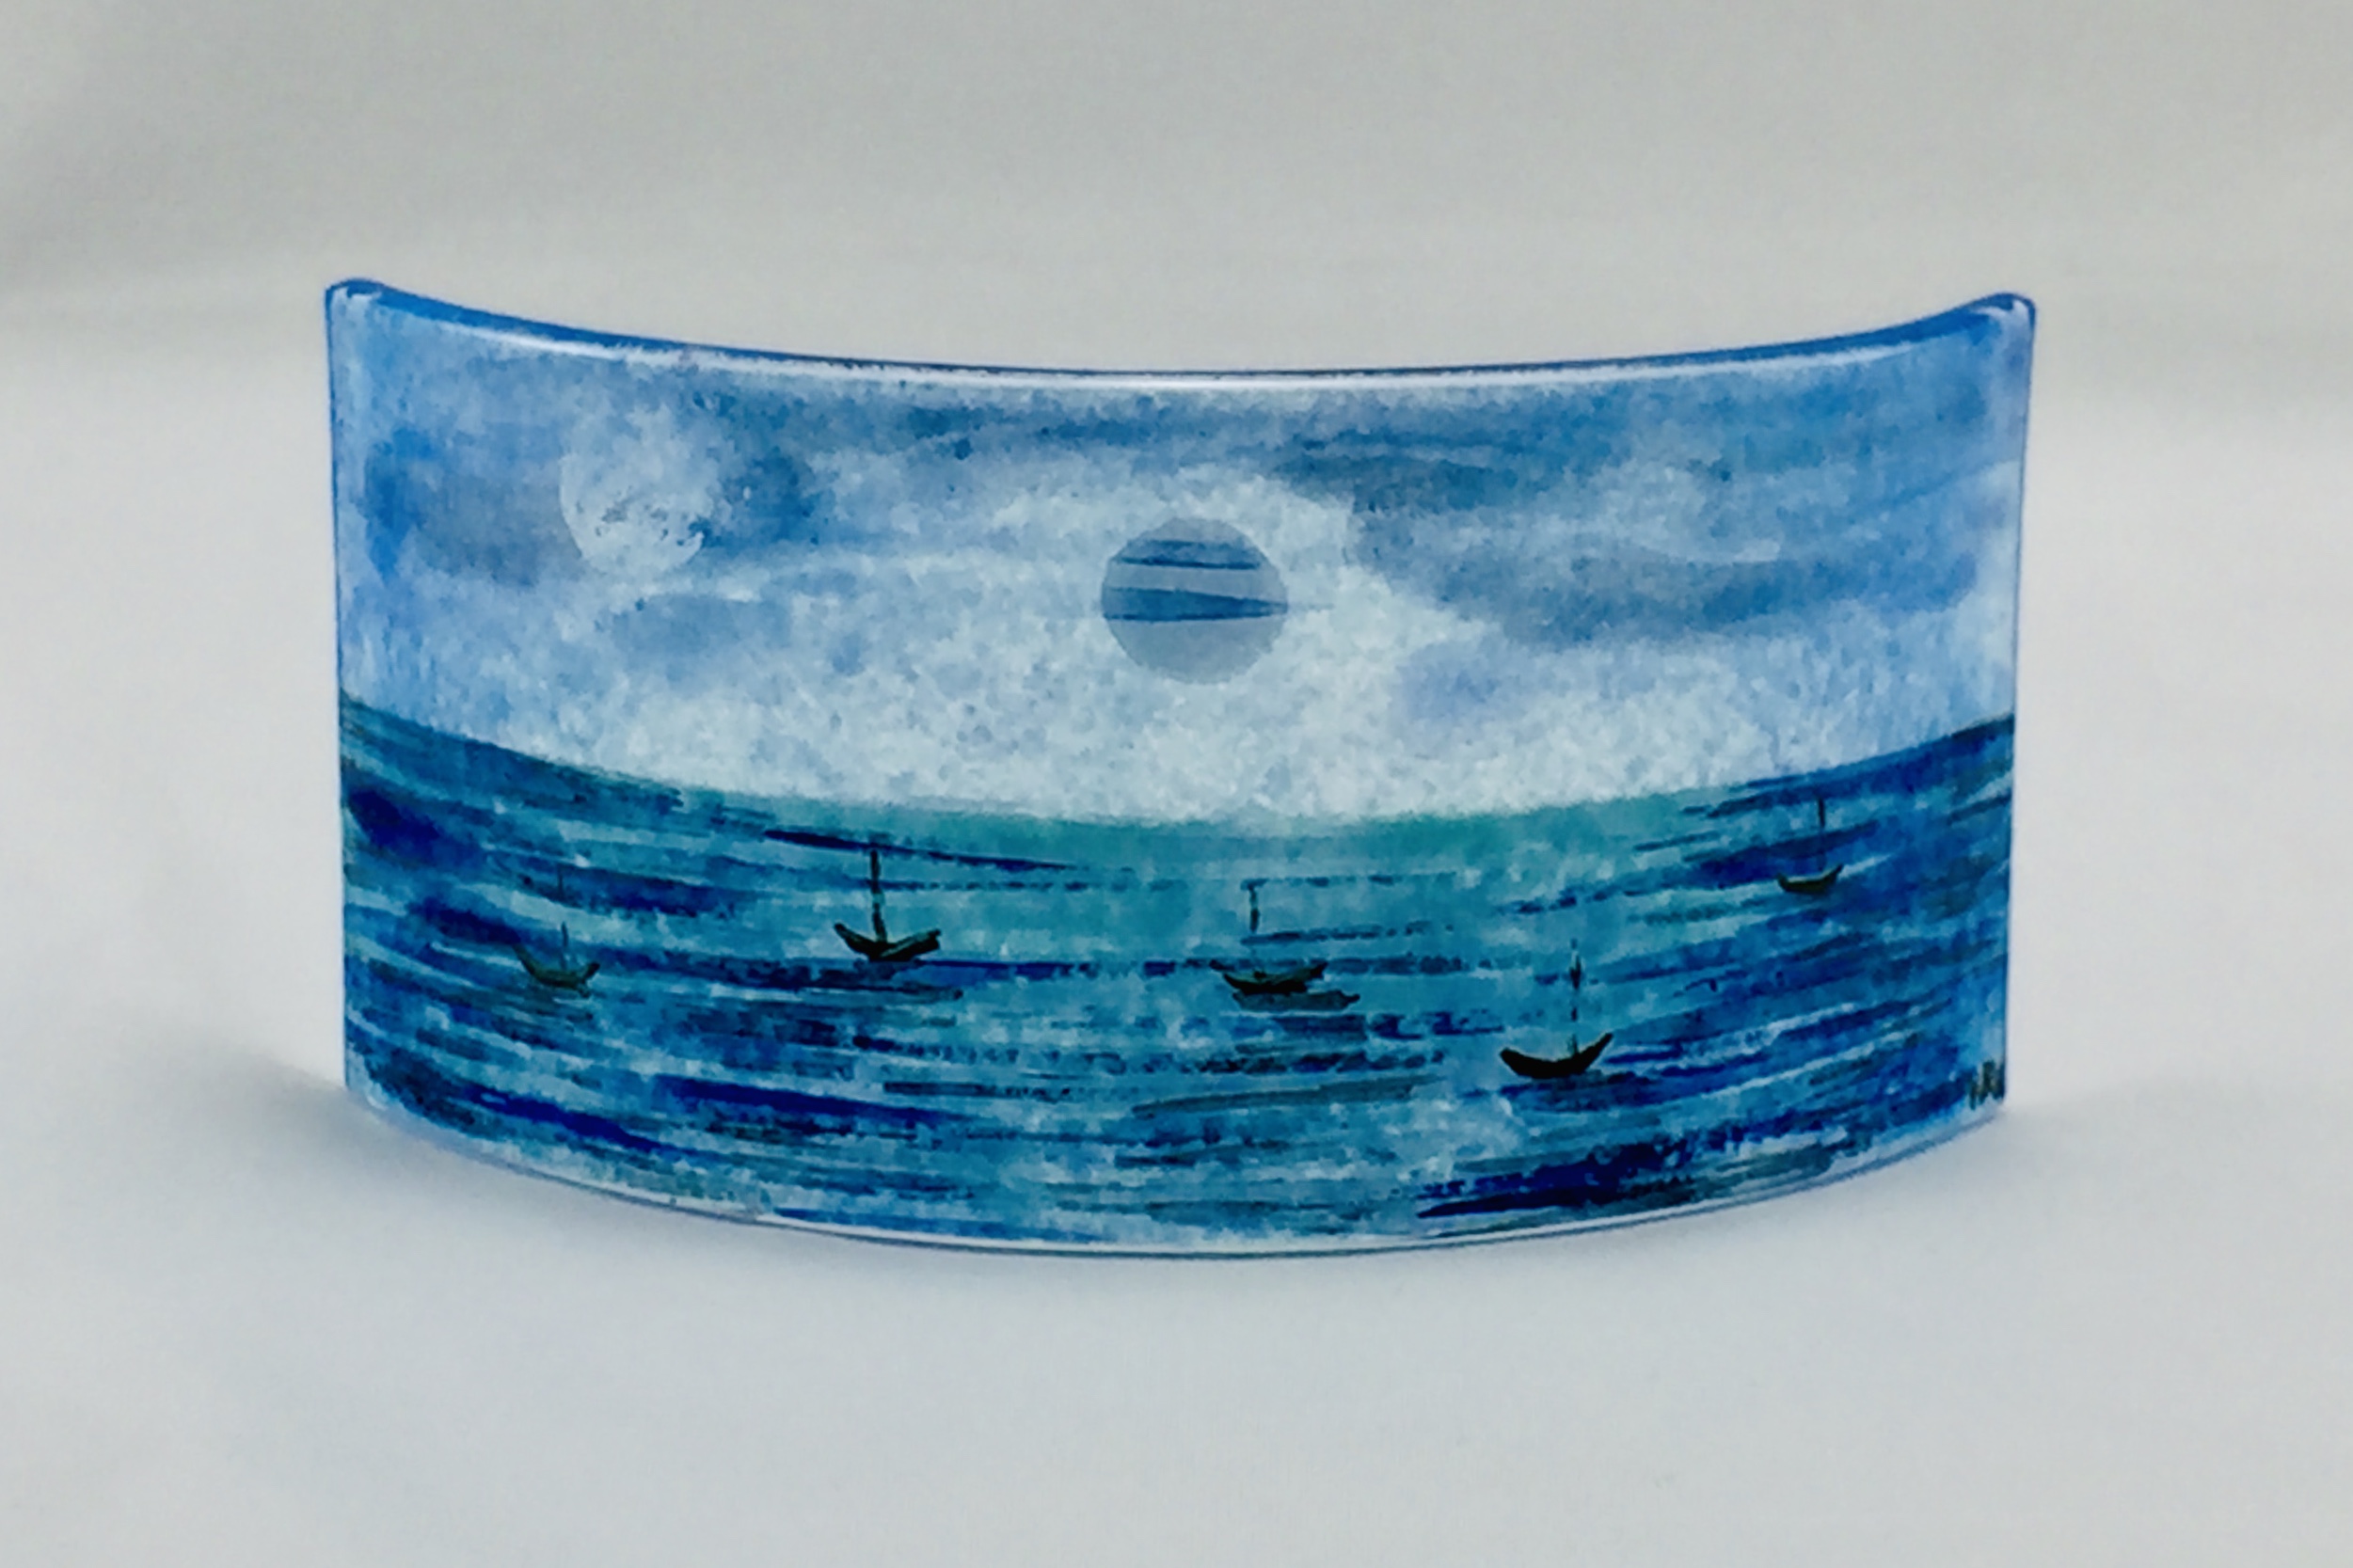 Mini fused glass panel of moonlit sea with boats